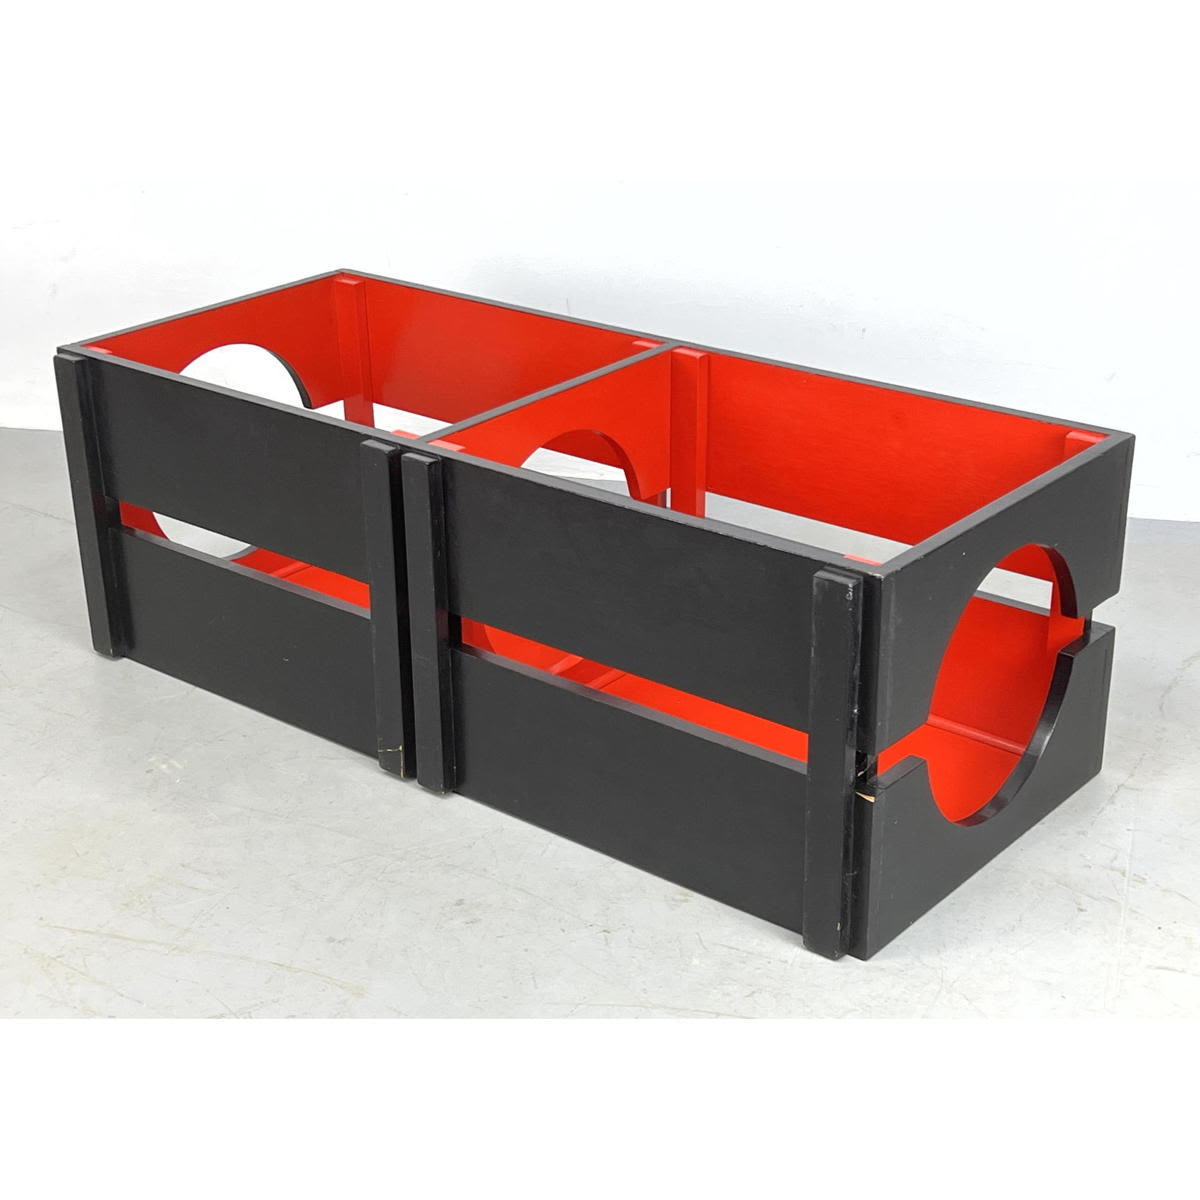 DDE STIJL STYLE low console. Red